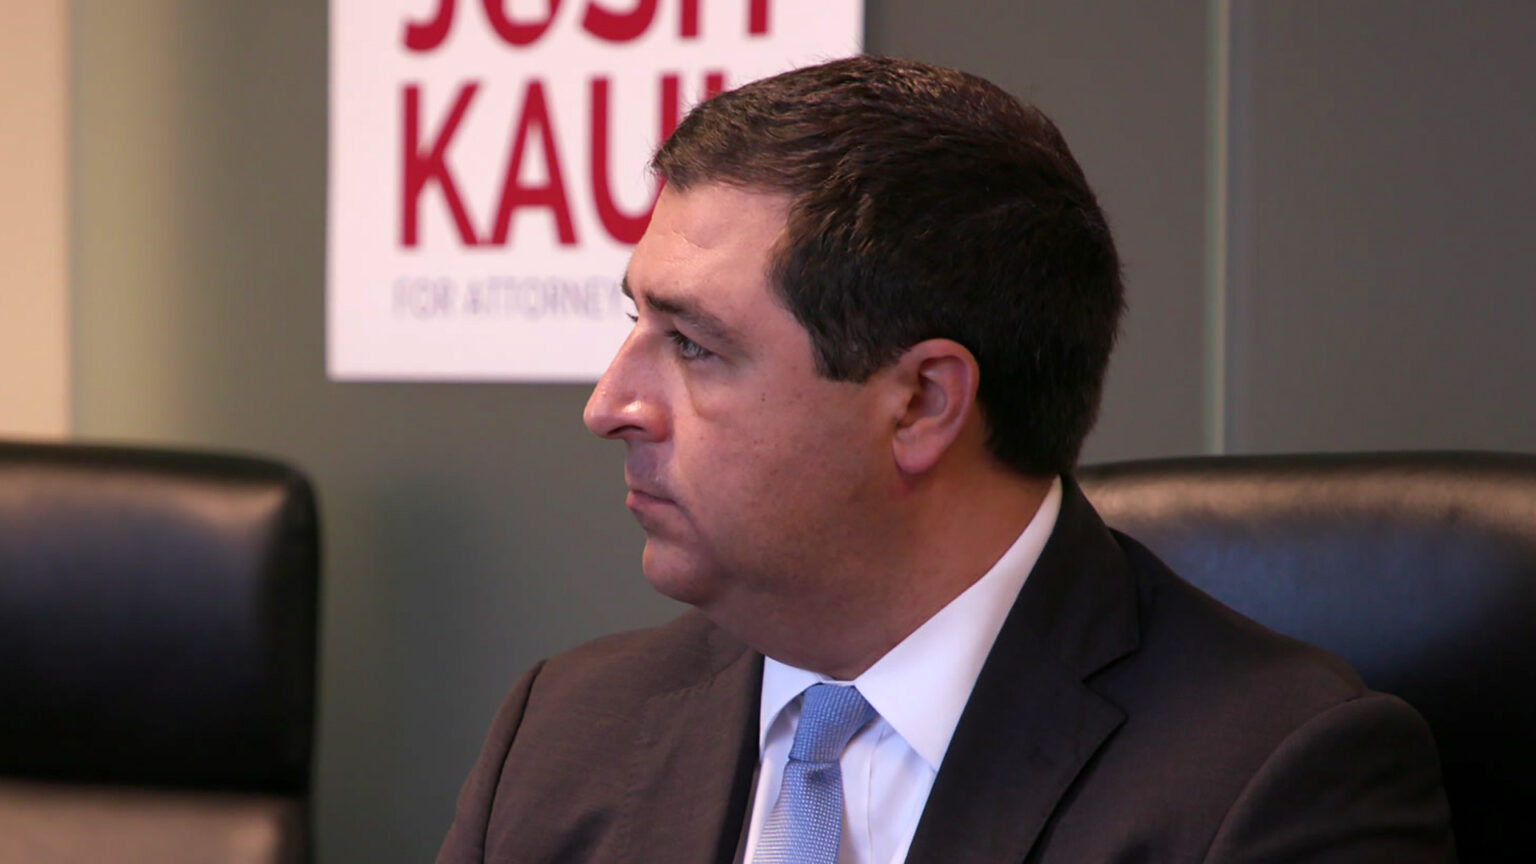 Josh Kaul is seen in profile while seated in a high-backed chair in a room with an out-of-focus campaign sign for his 2022 candidacy in the background.